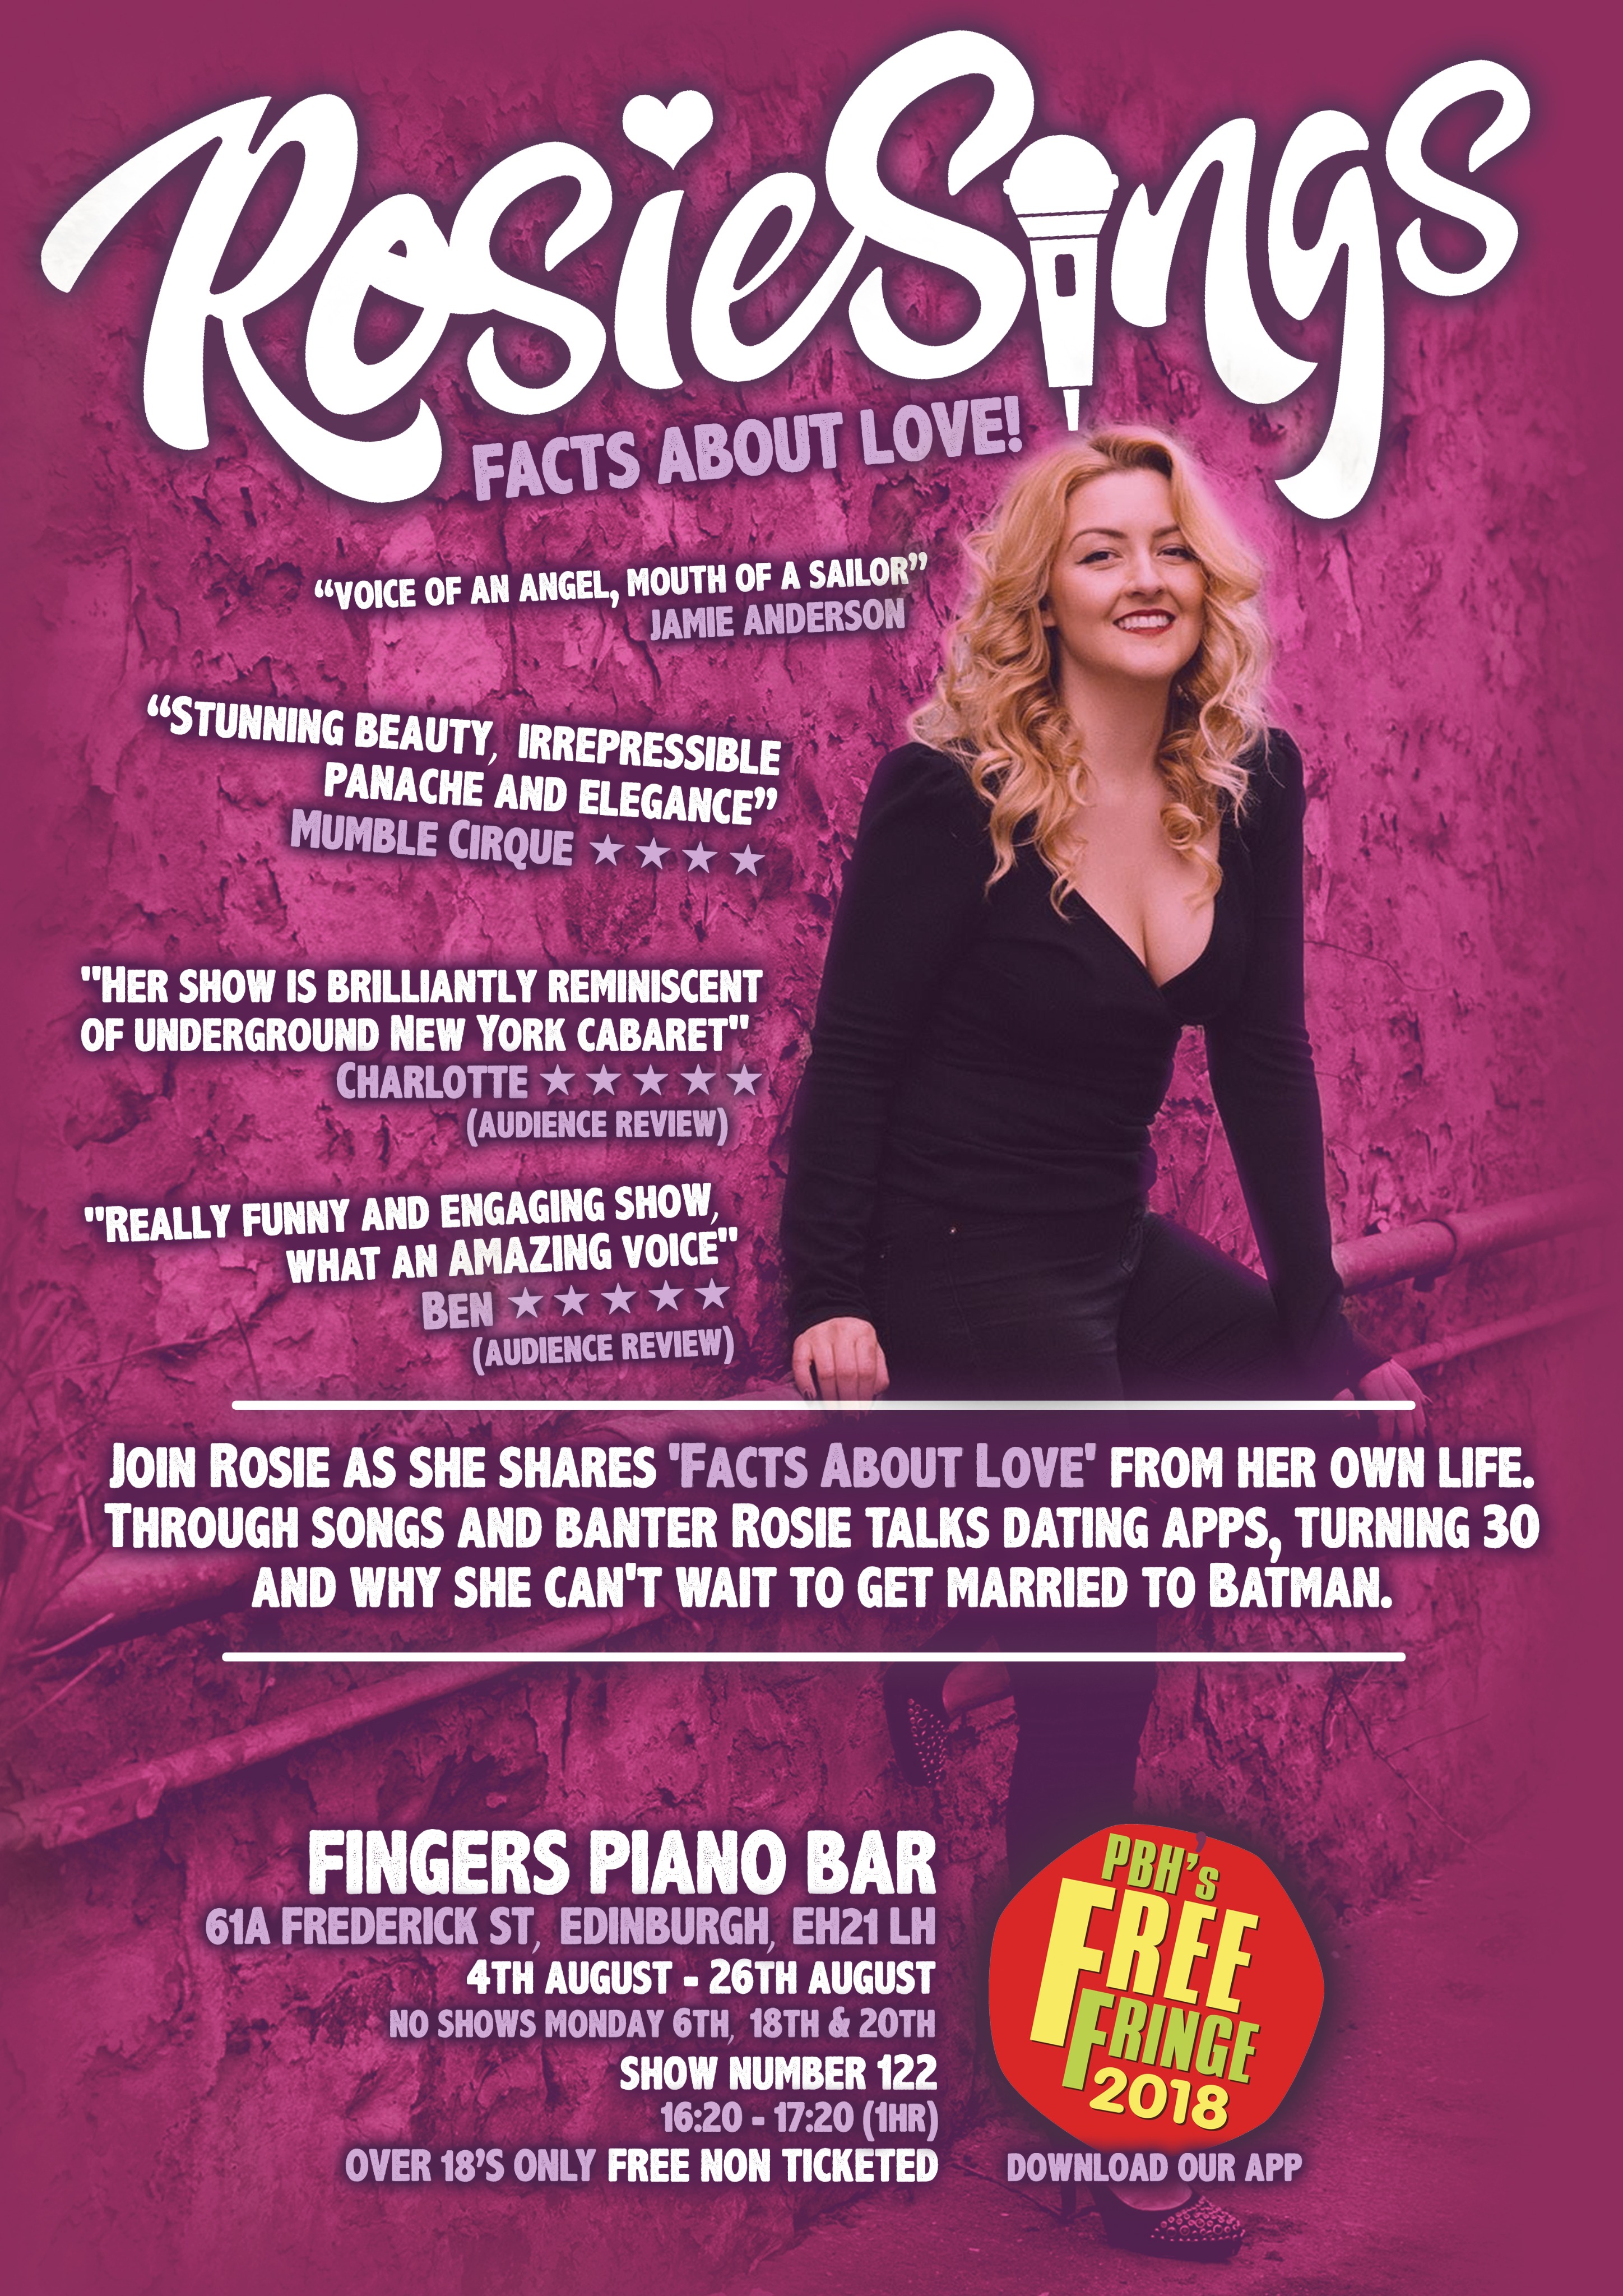 The poster for Rosie Sings - Facts About Love!